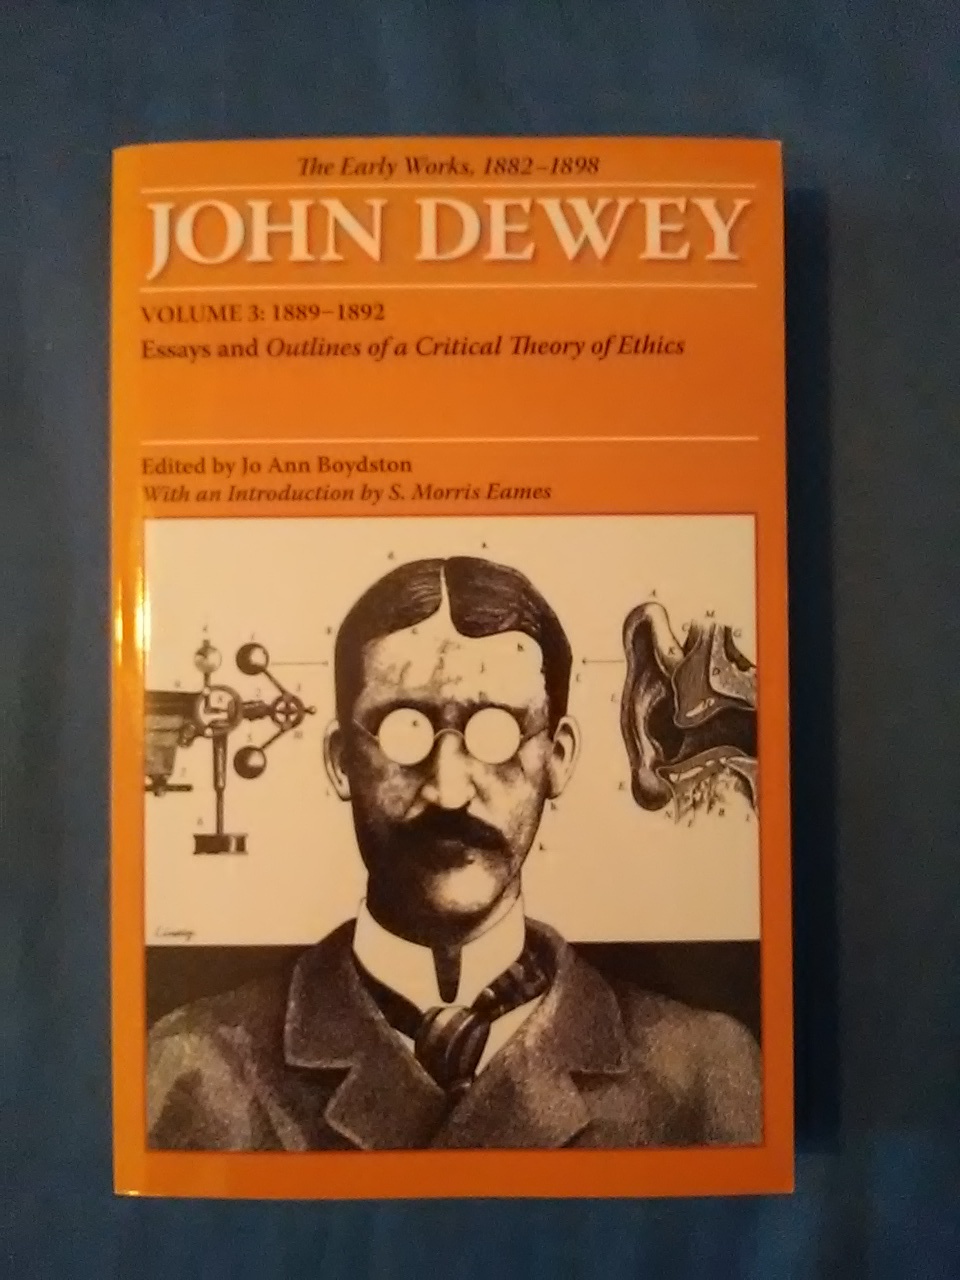 The Early Works of John Dewey, 1882 - 1898: Essays and Outlines of a Critical Theory of Ethics, Volume 3: 889-1892 (Collected Works of John Dewey, 1882-1953, Band 3) - Boydston, Jo Ann and John Dewey